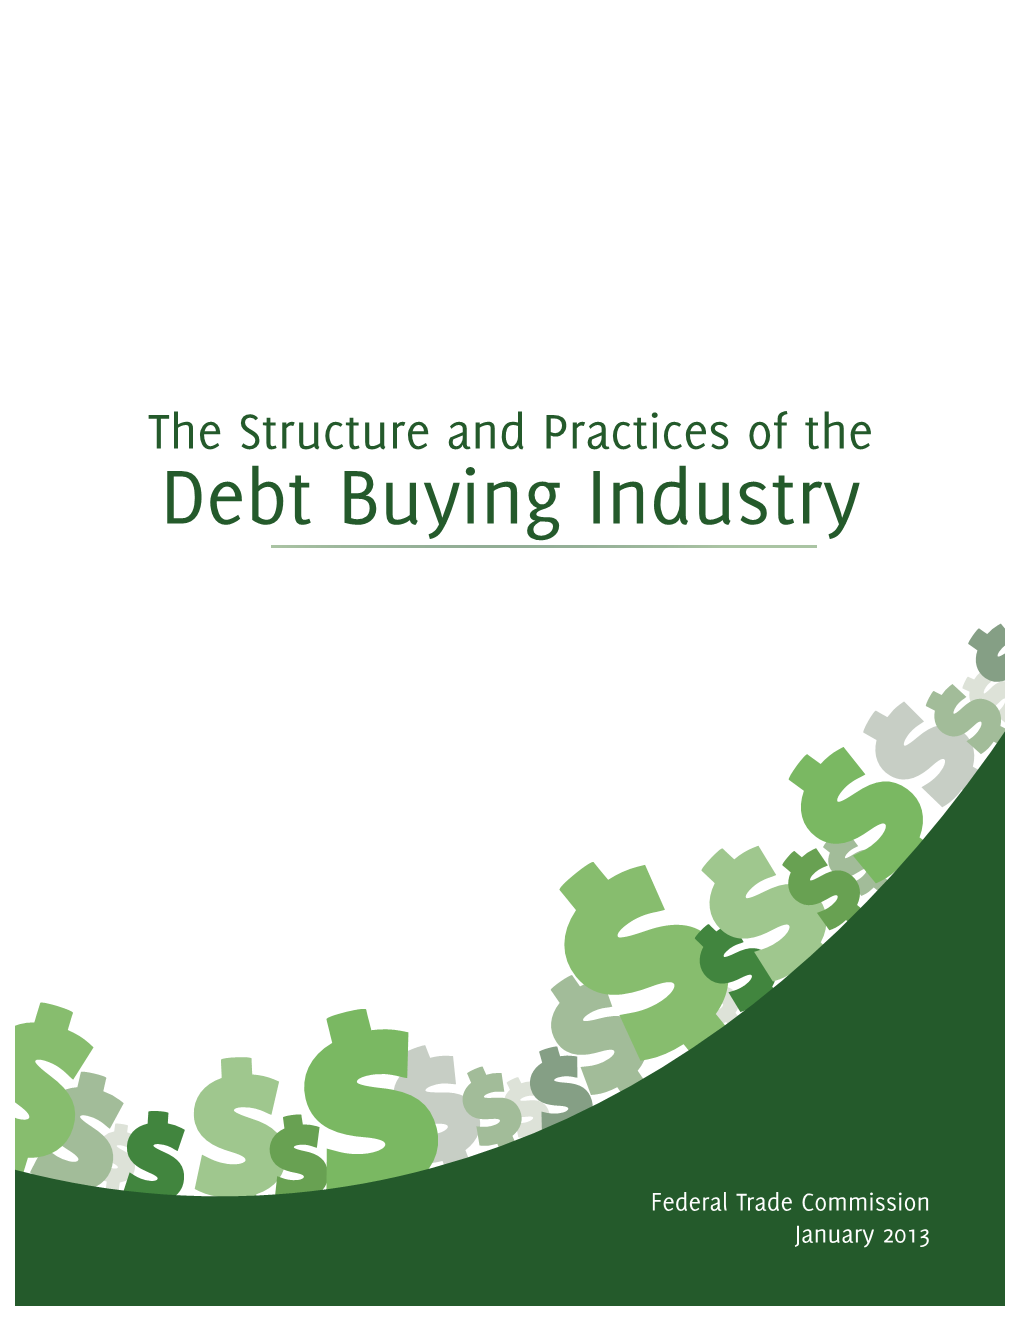 The Structure and Practices of the Debt Buying Industry (January 2013)